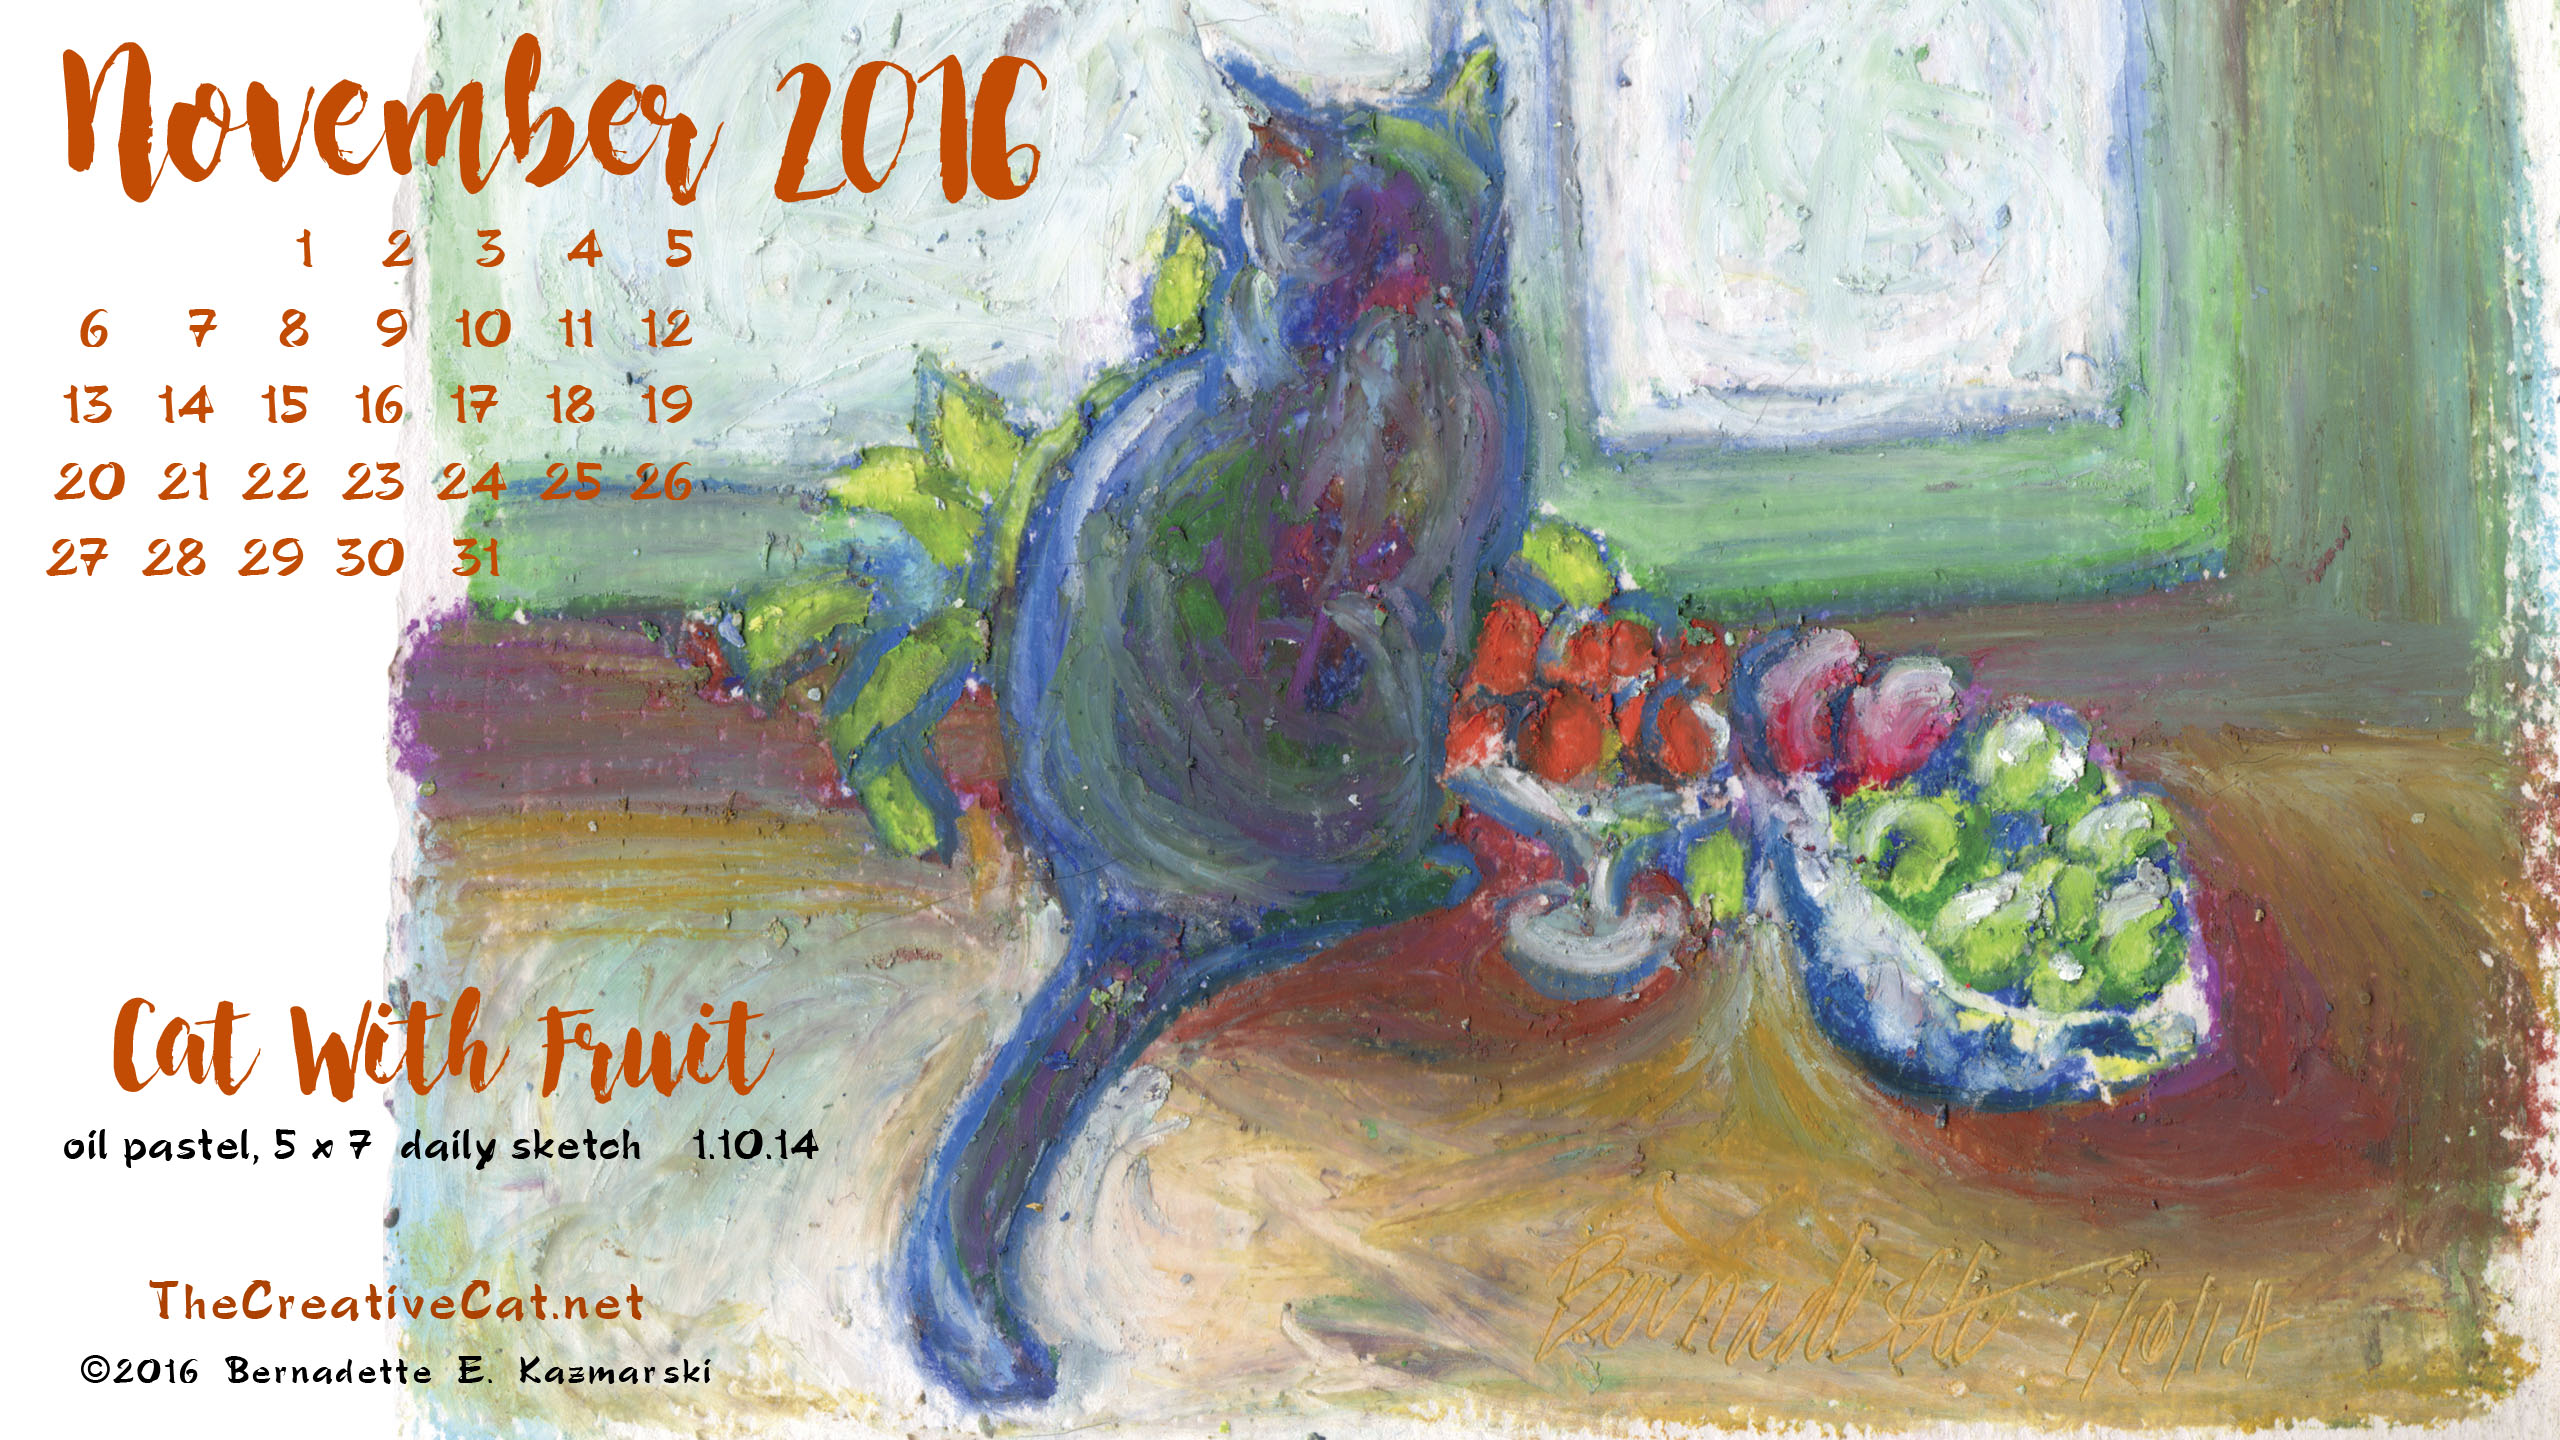 "Cat With Fruit" desktop calendar 2560 x 1440 for HD and wide screens.